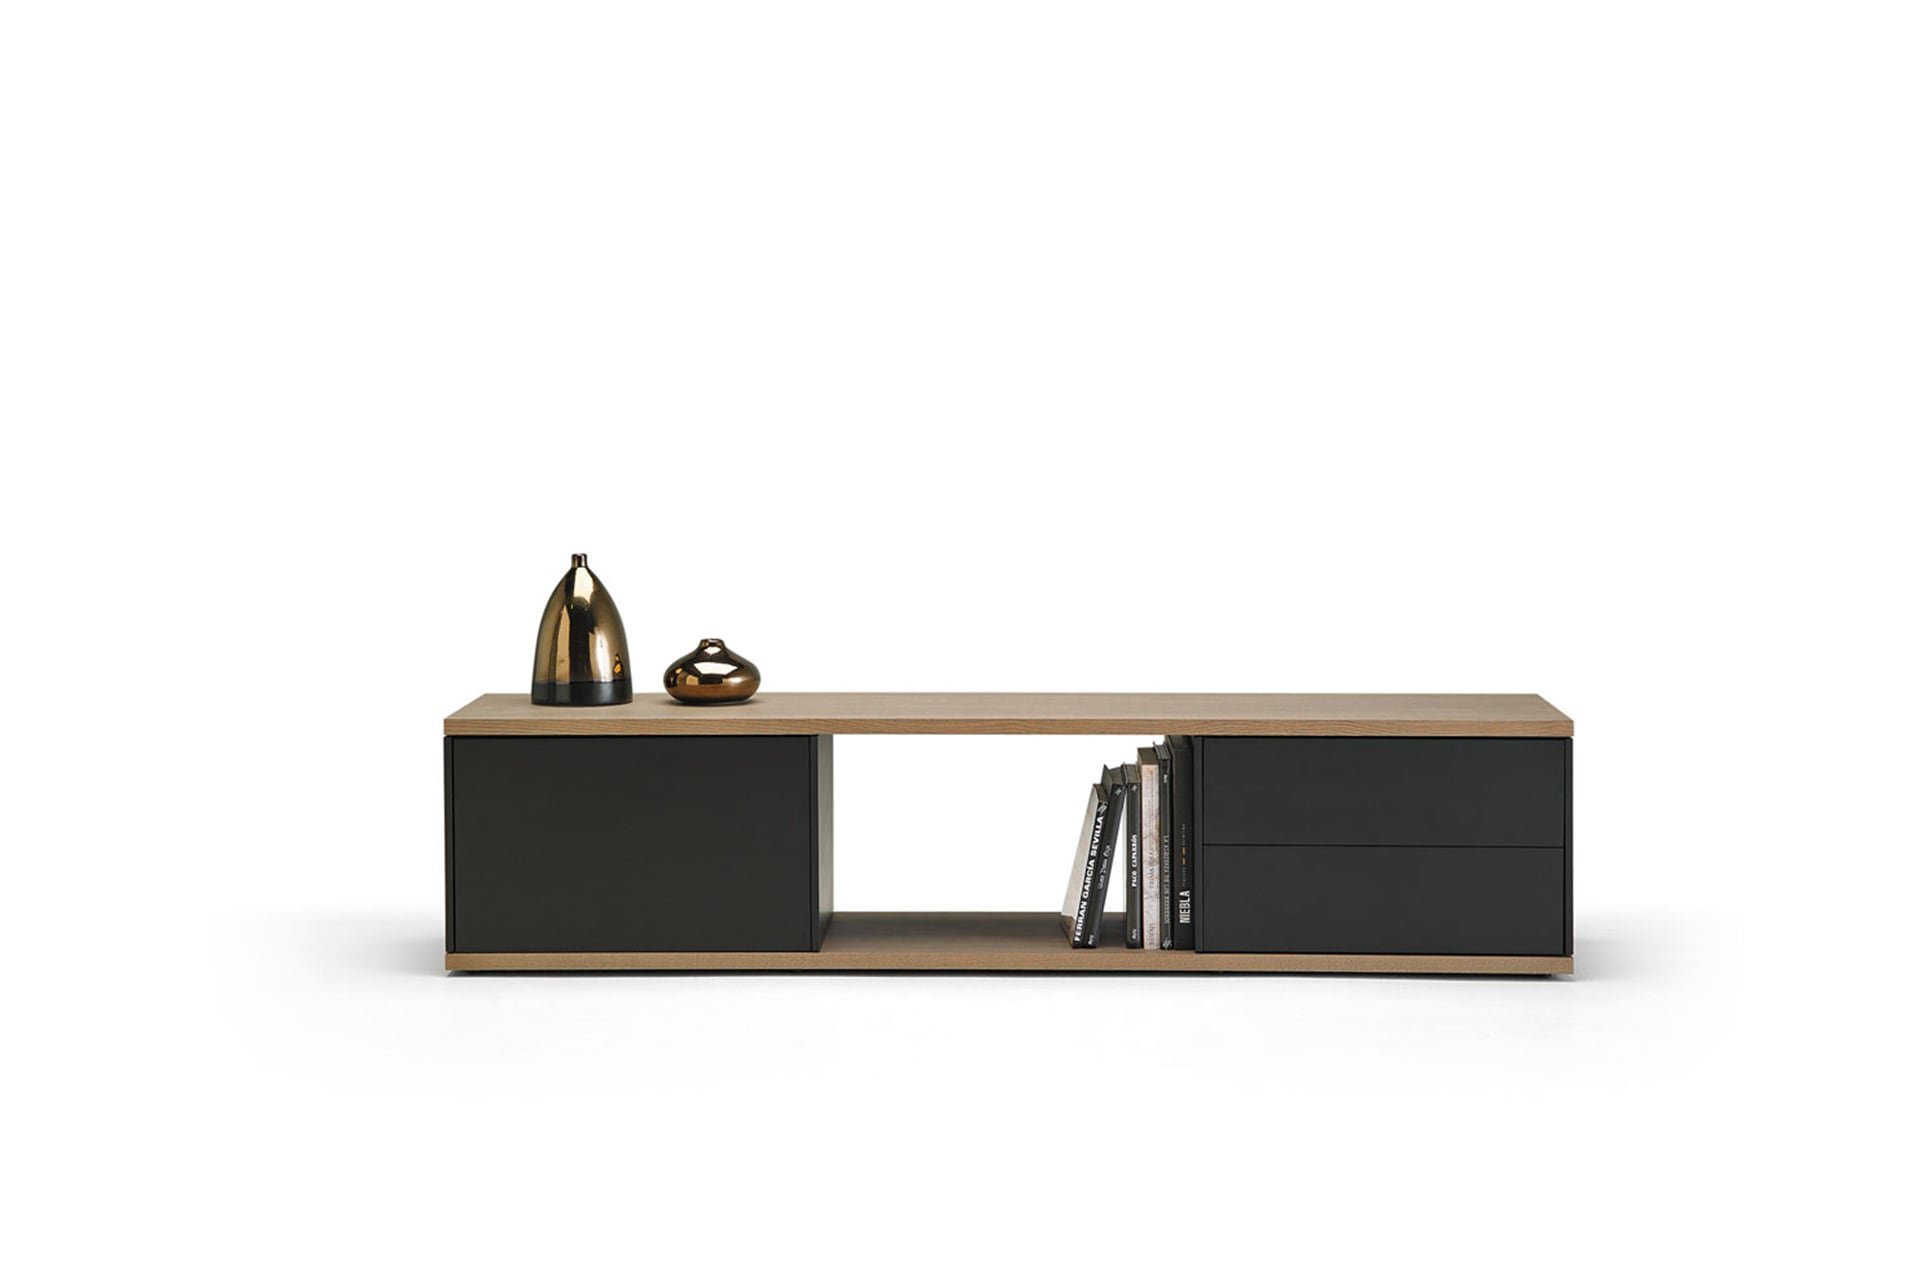 Slats Sideboard from Punt Mobles, designed by Marc Krusin